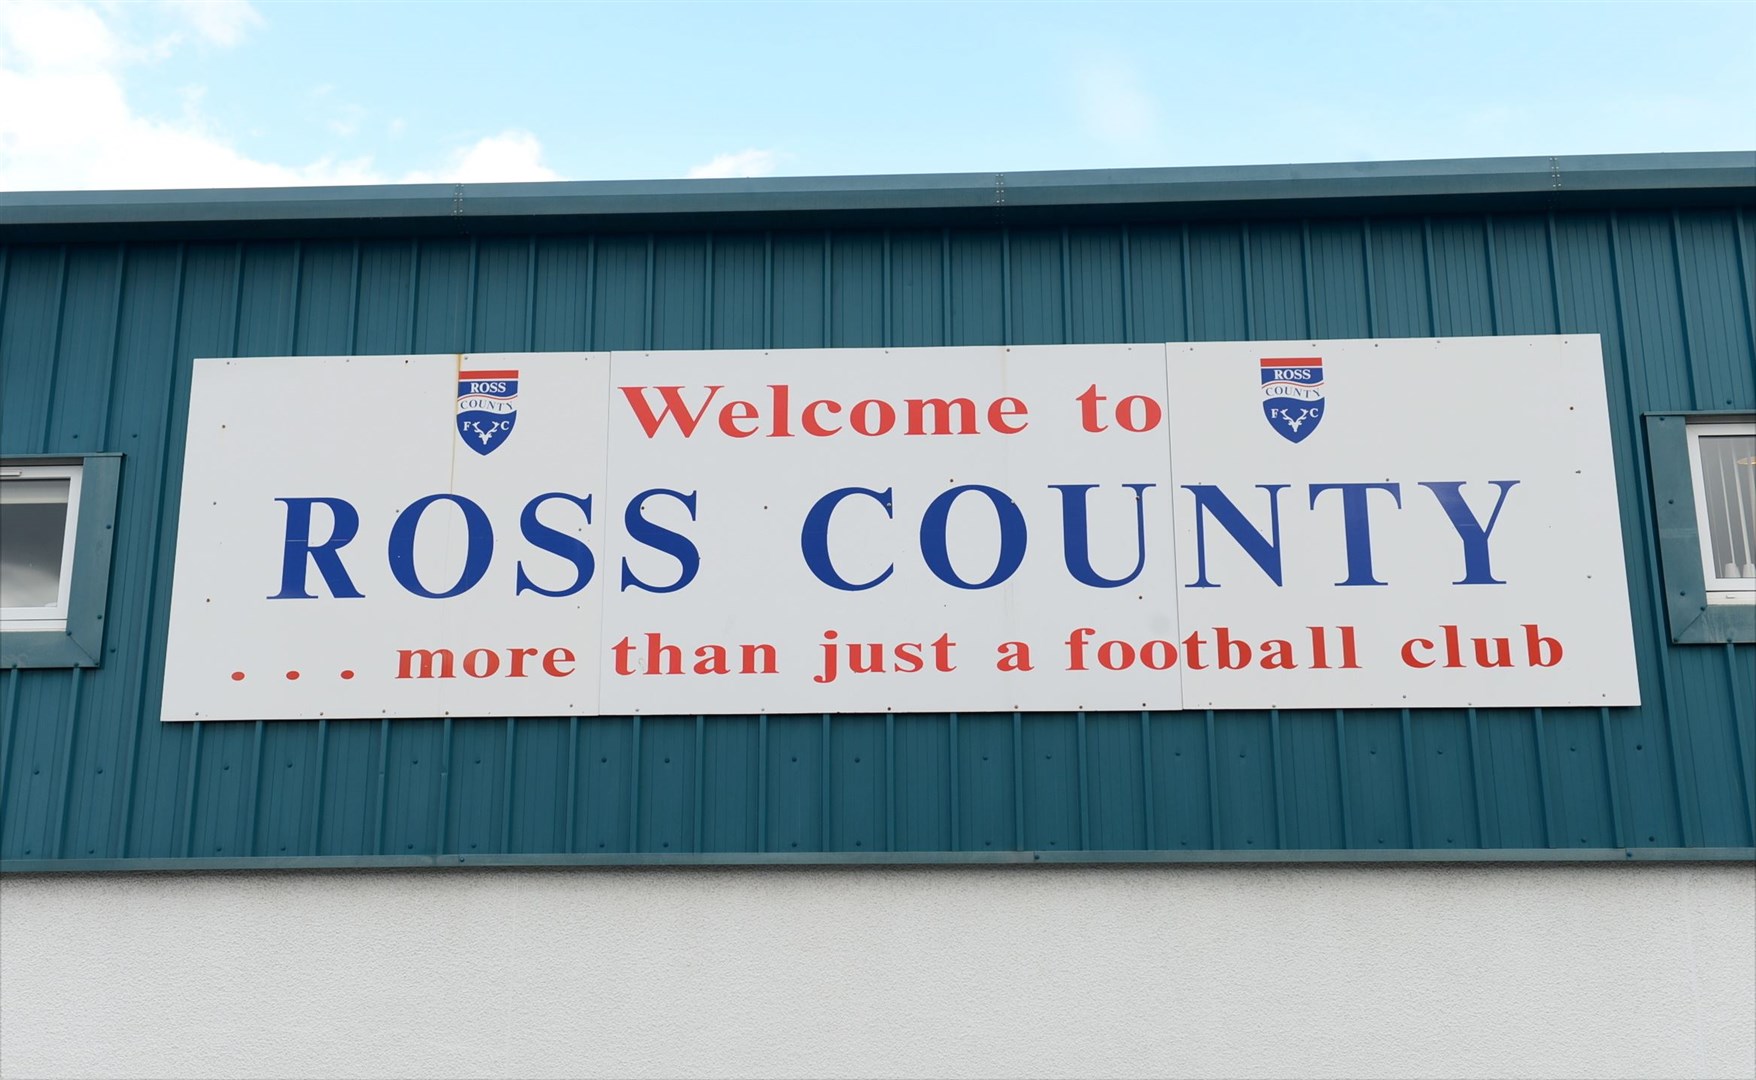 Ross County recorded a loss of £500,000 in its latest figures.